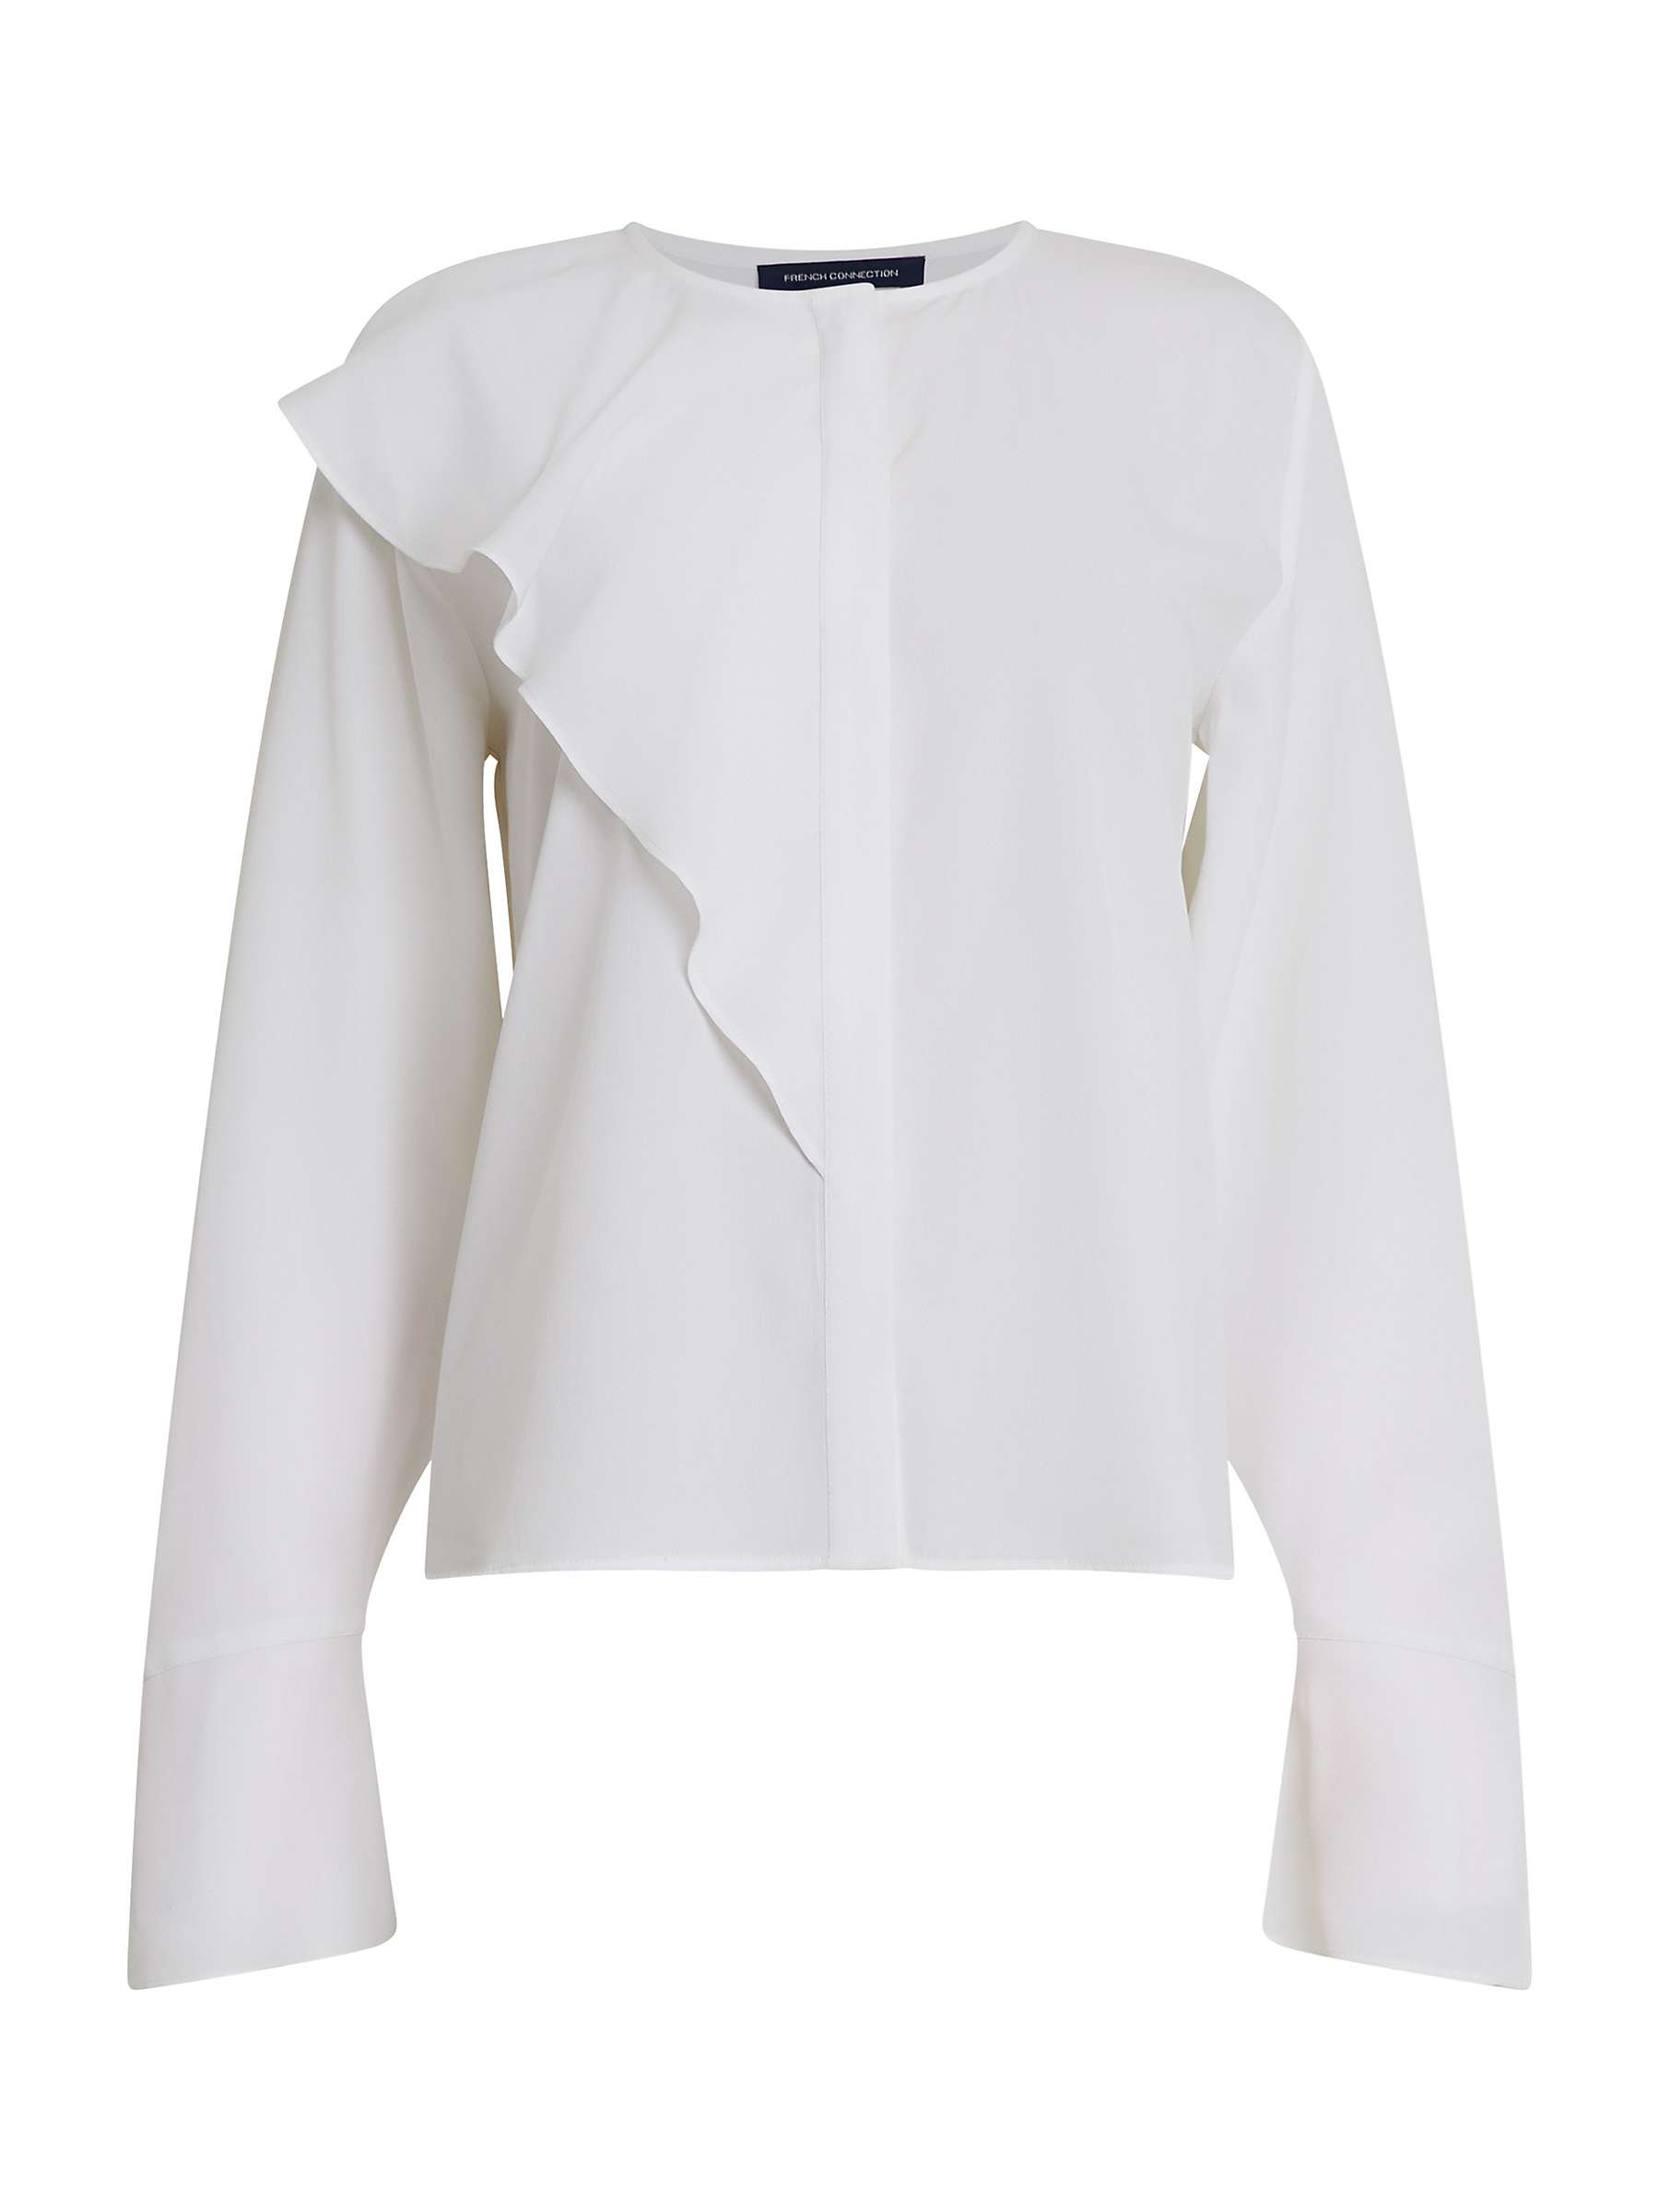 Buy French Connection Crepe Shirt Online at johnlewis.com